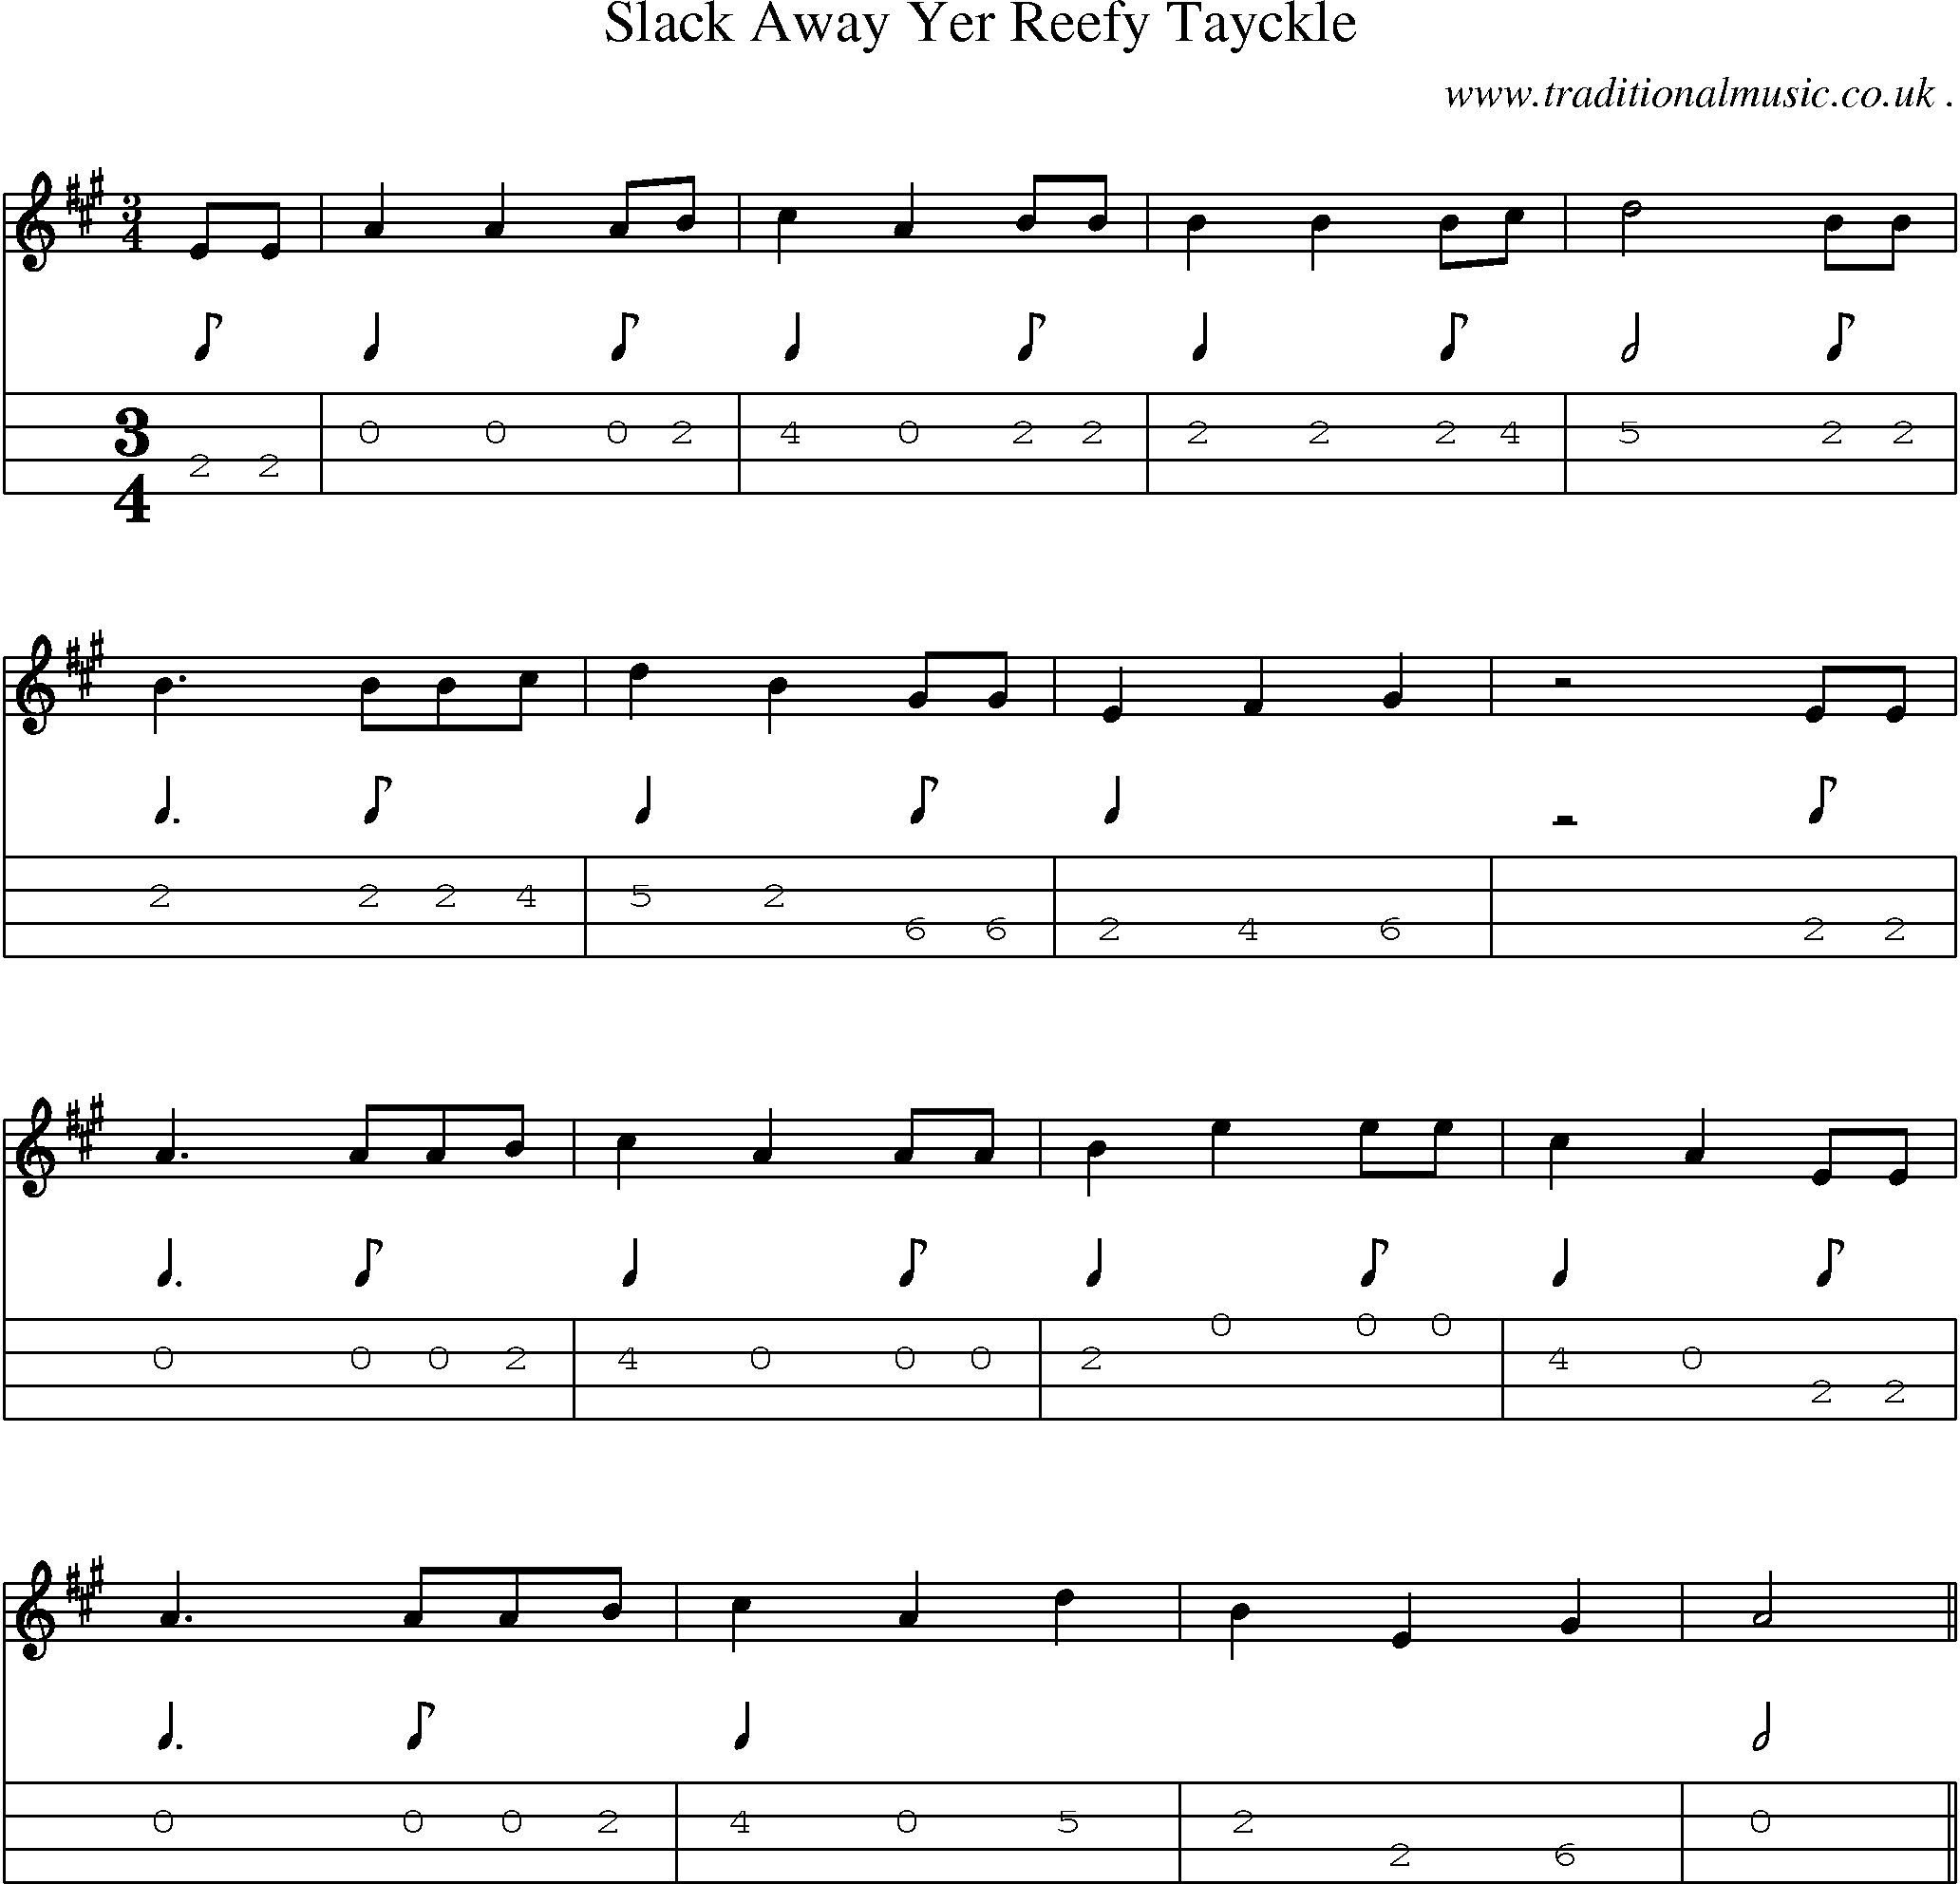 Sheet-Music and Mandolin Tabs for Slack Away Yer Reefy Tayckle